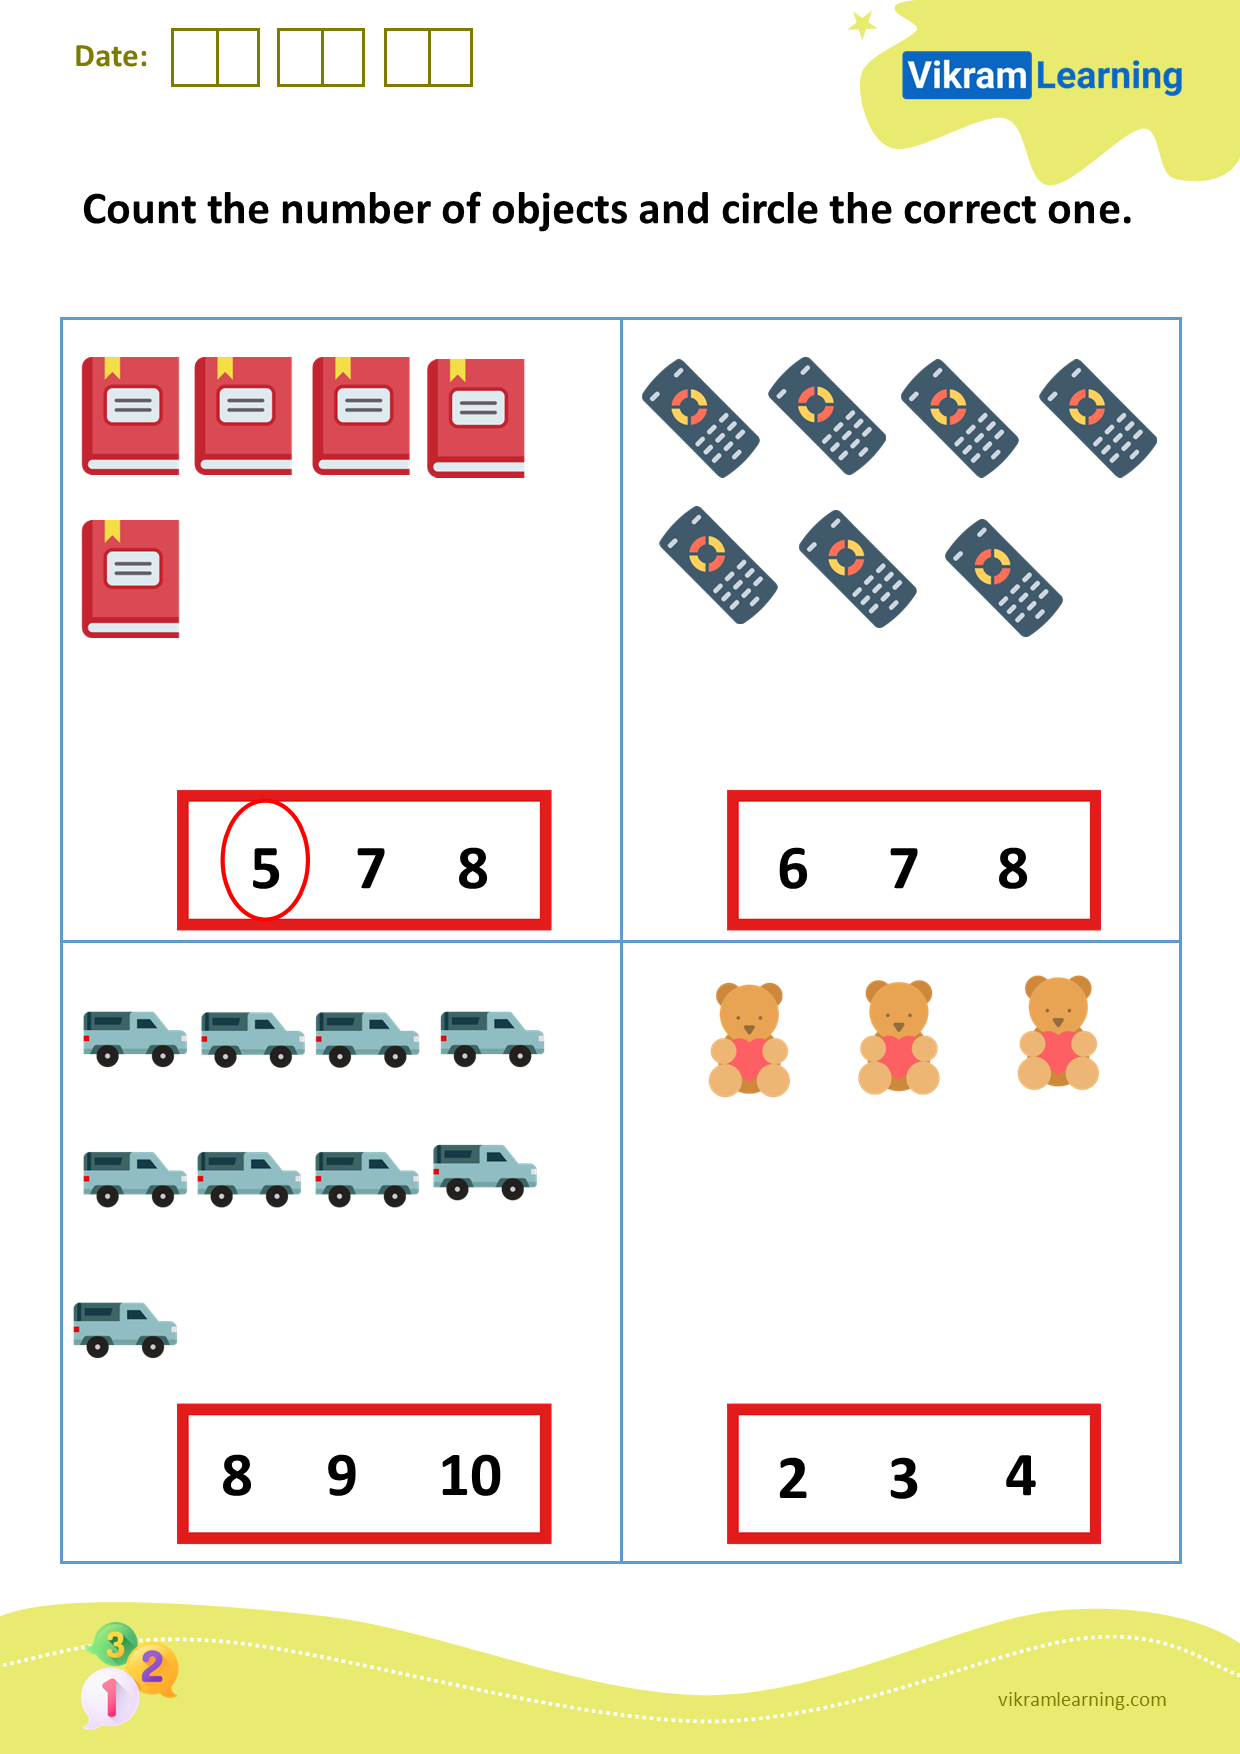 Download count the number of objects and circle the correct one worksheets